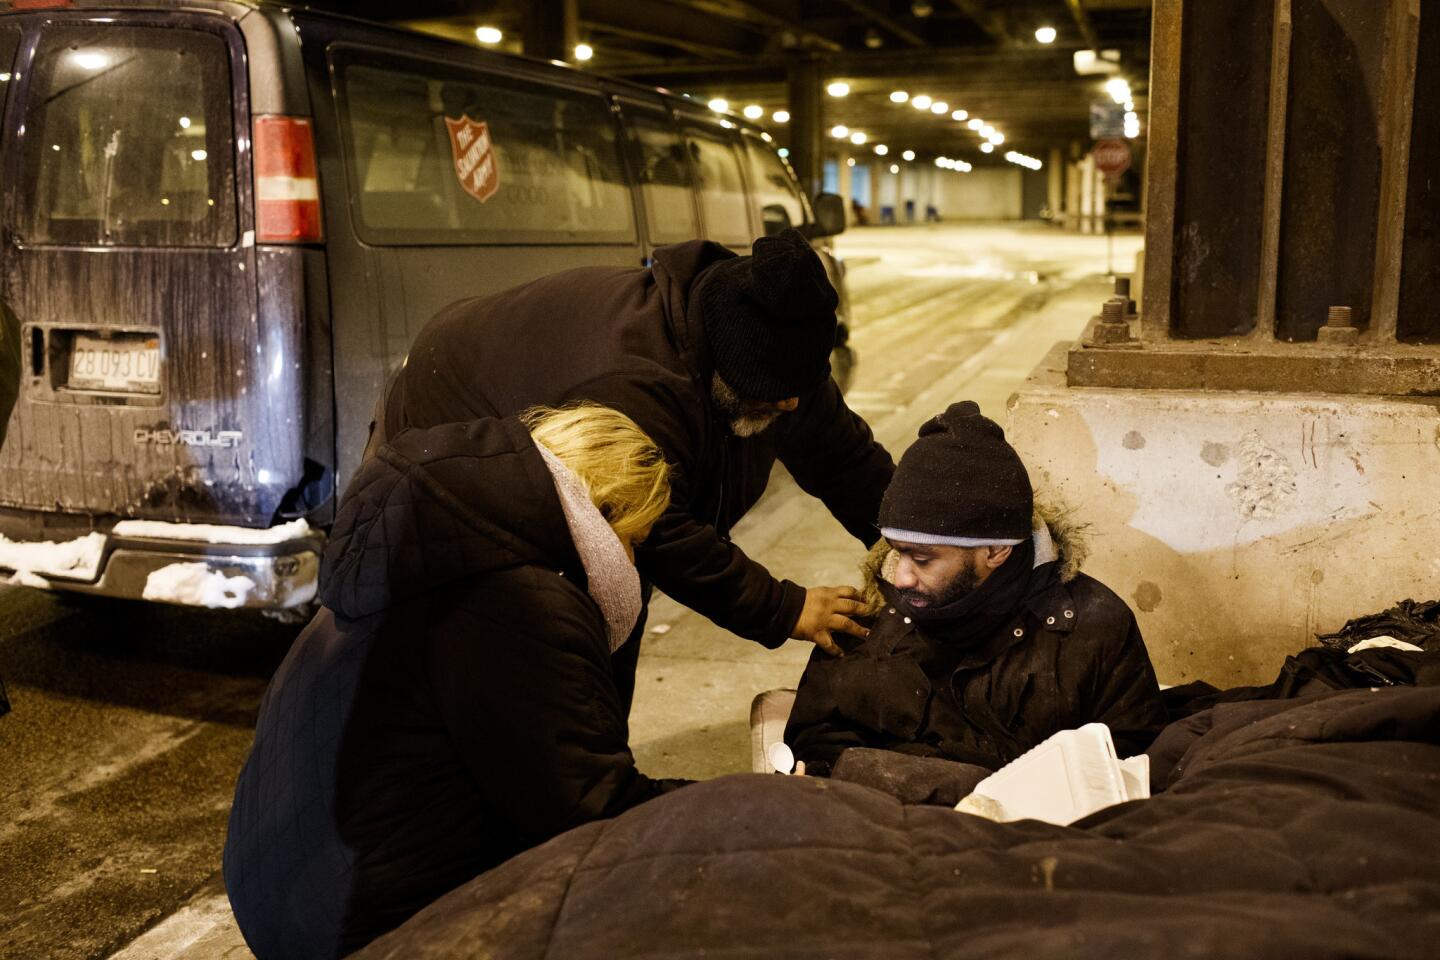 Helping the homeless